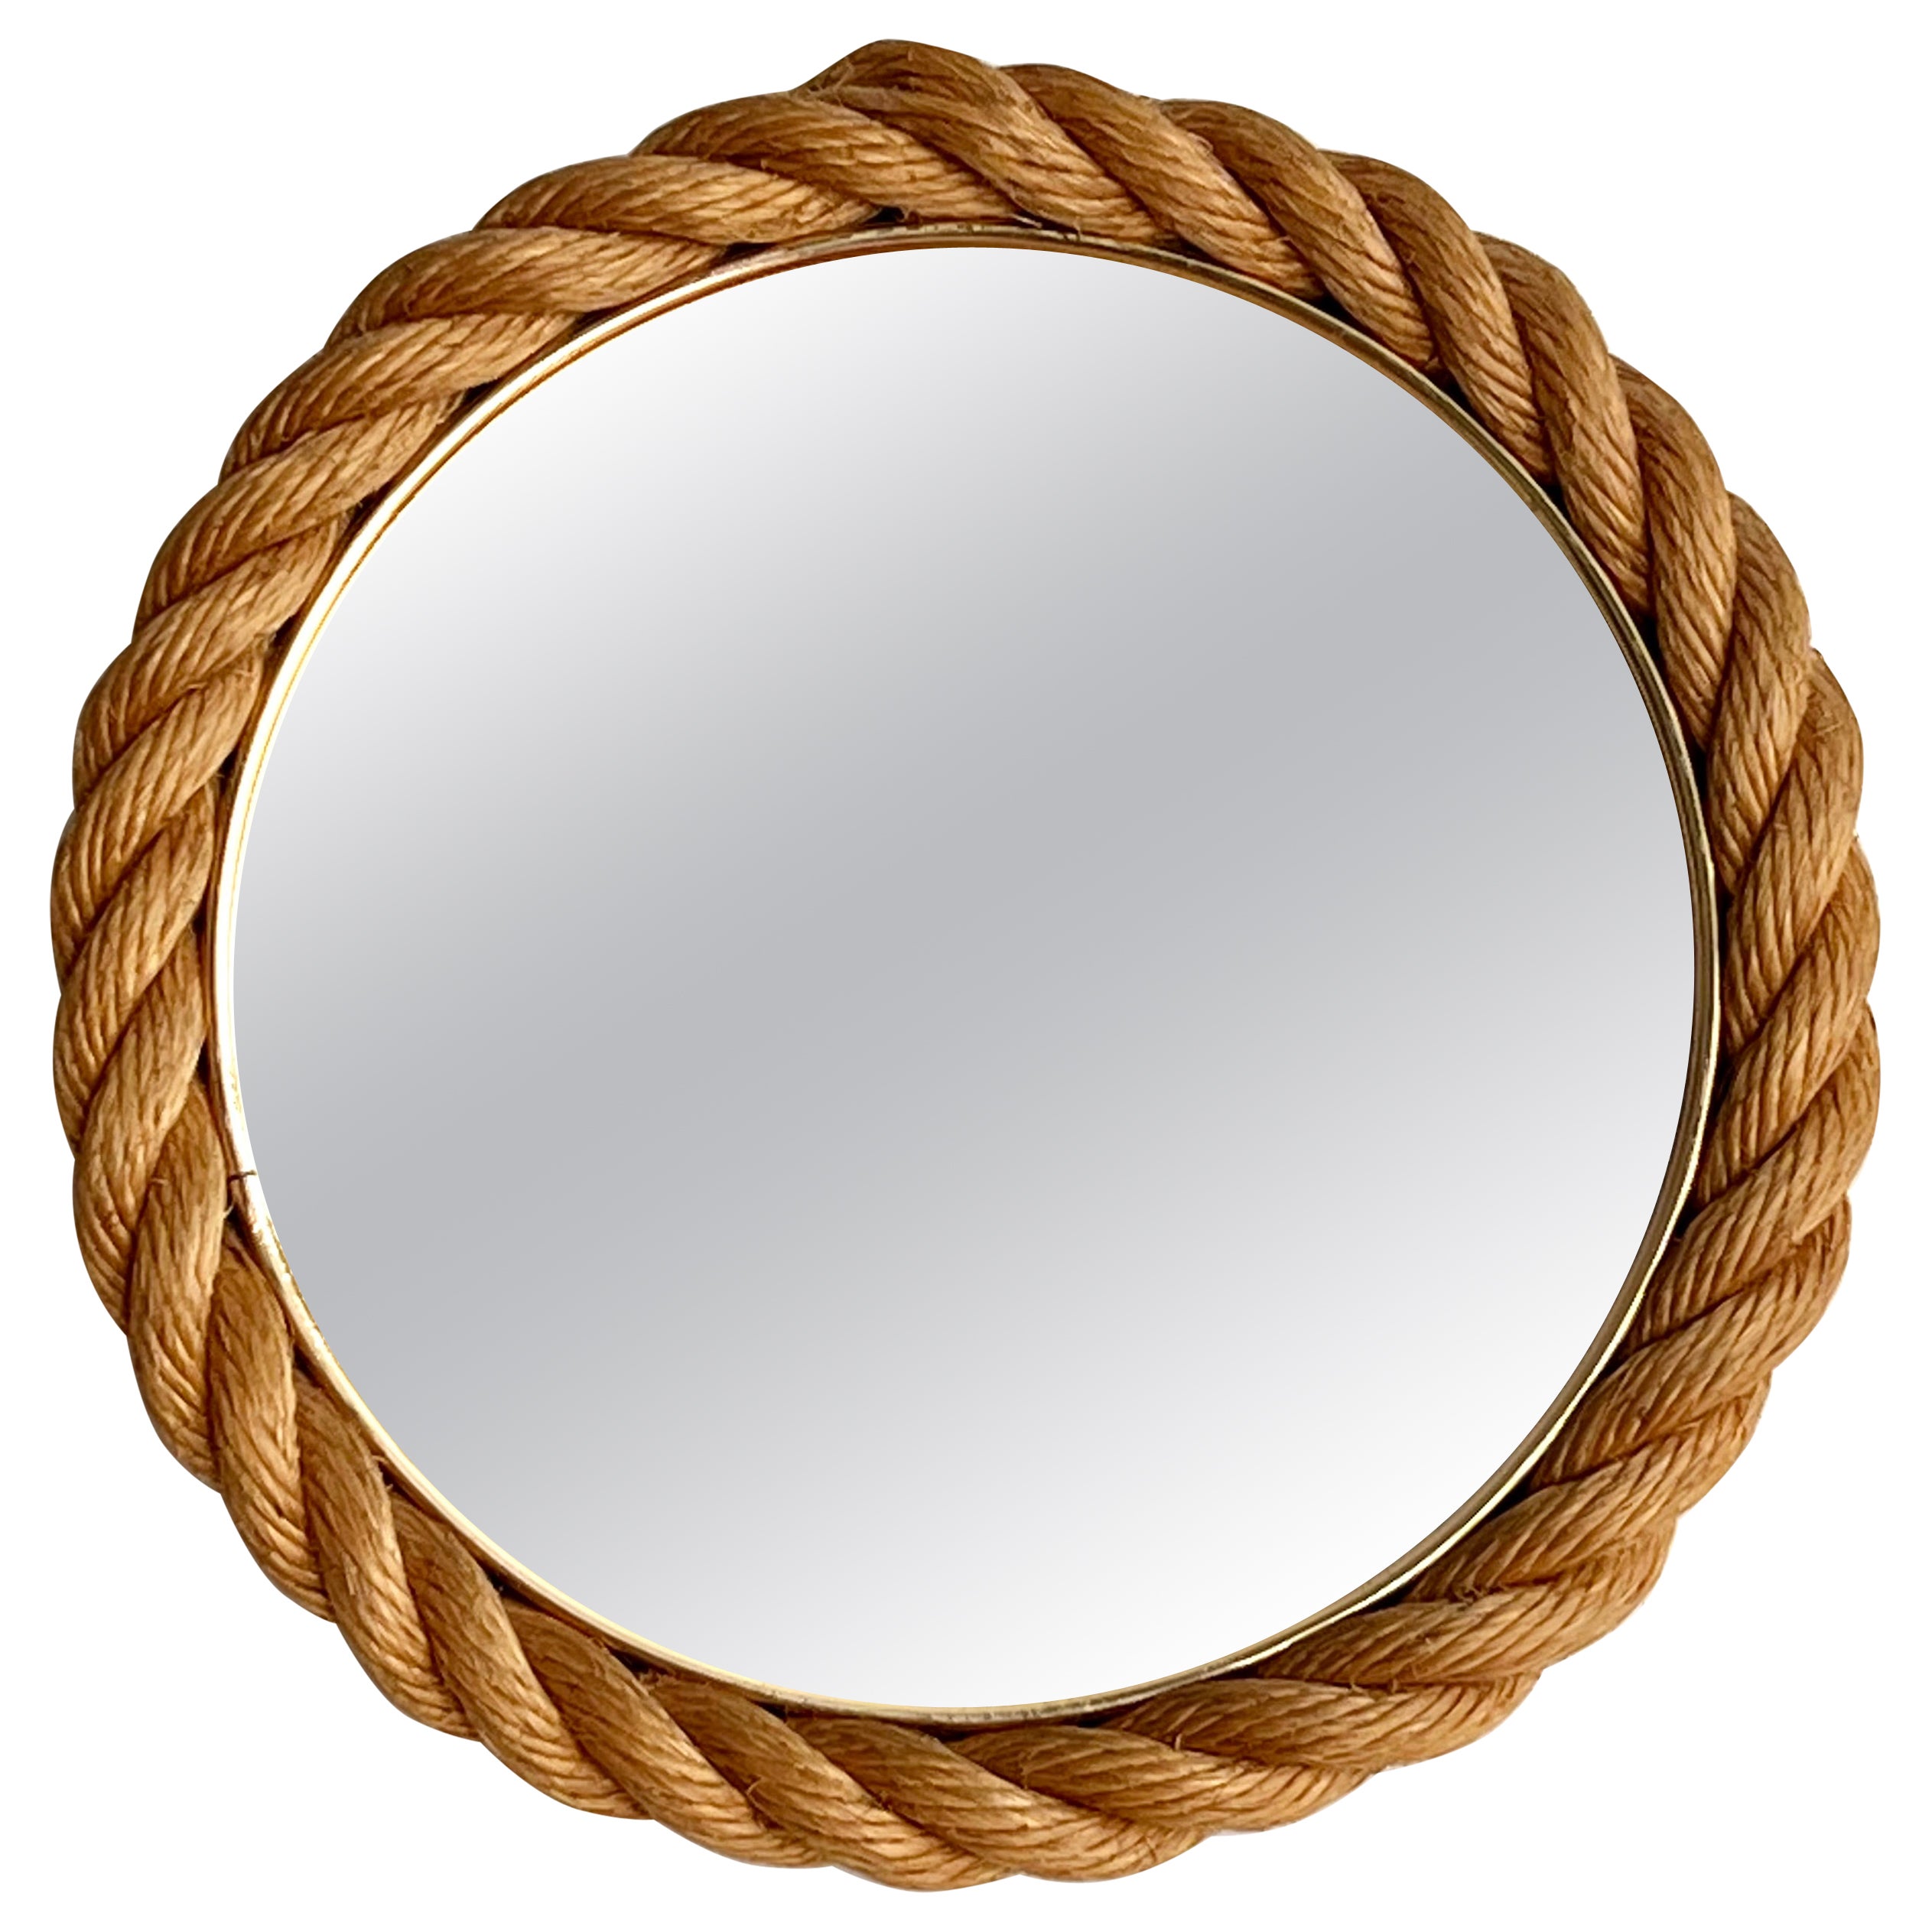 Rope Frame Mirror, Audoux & Minet, France, 1950-1960 For Sale